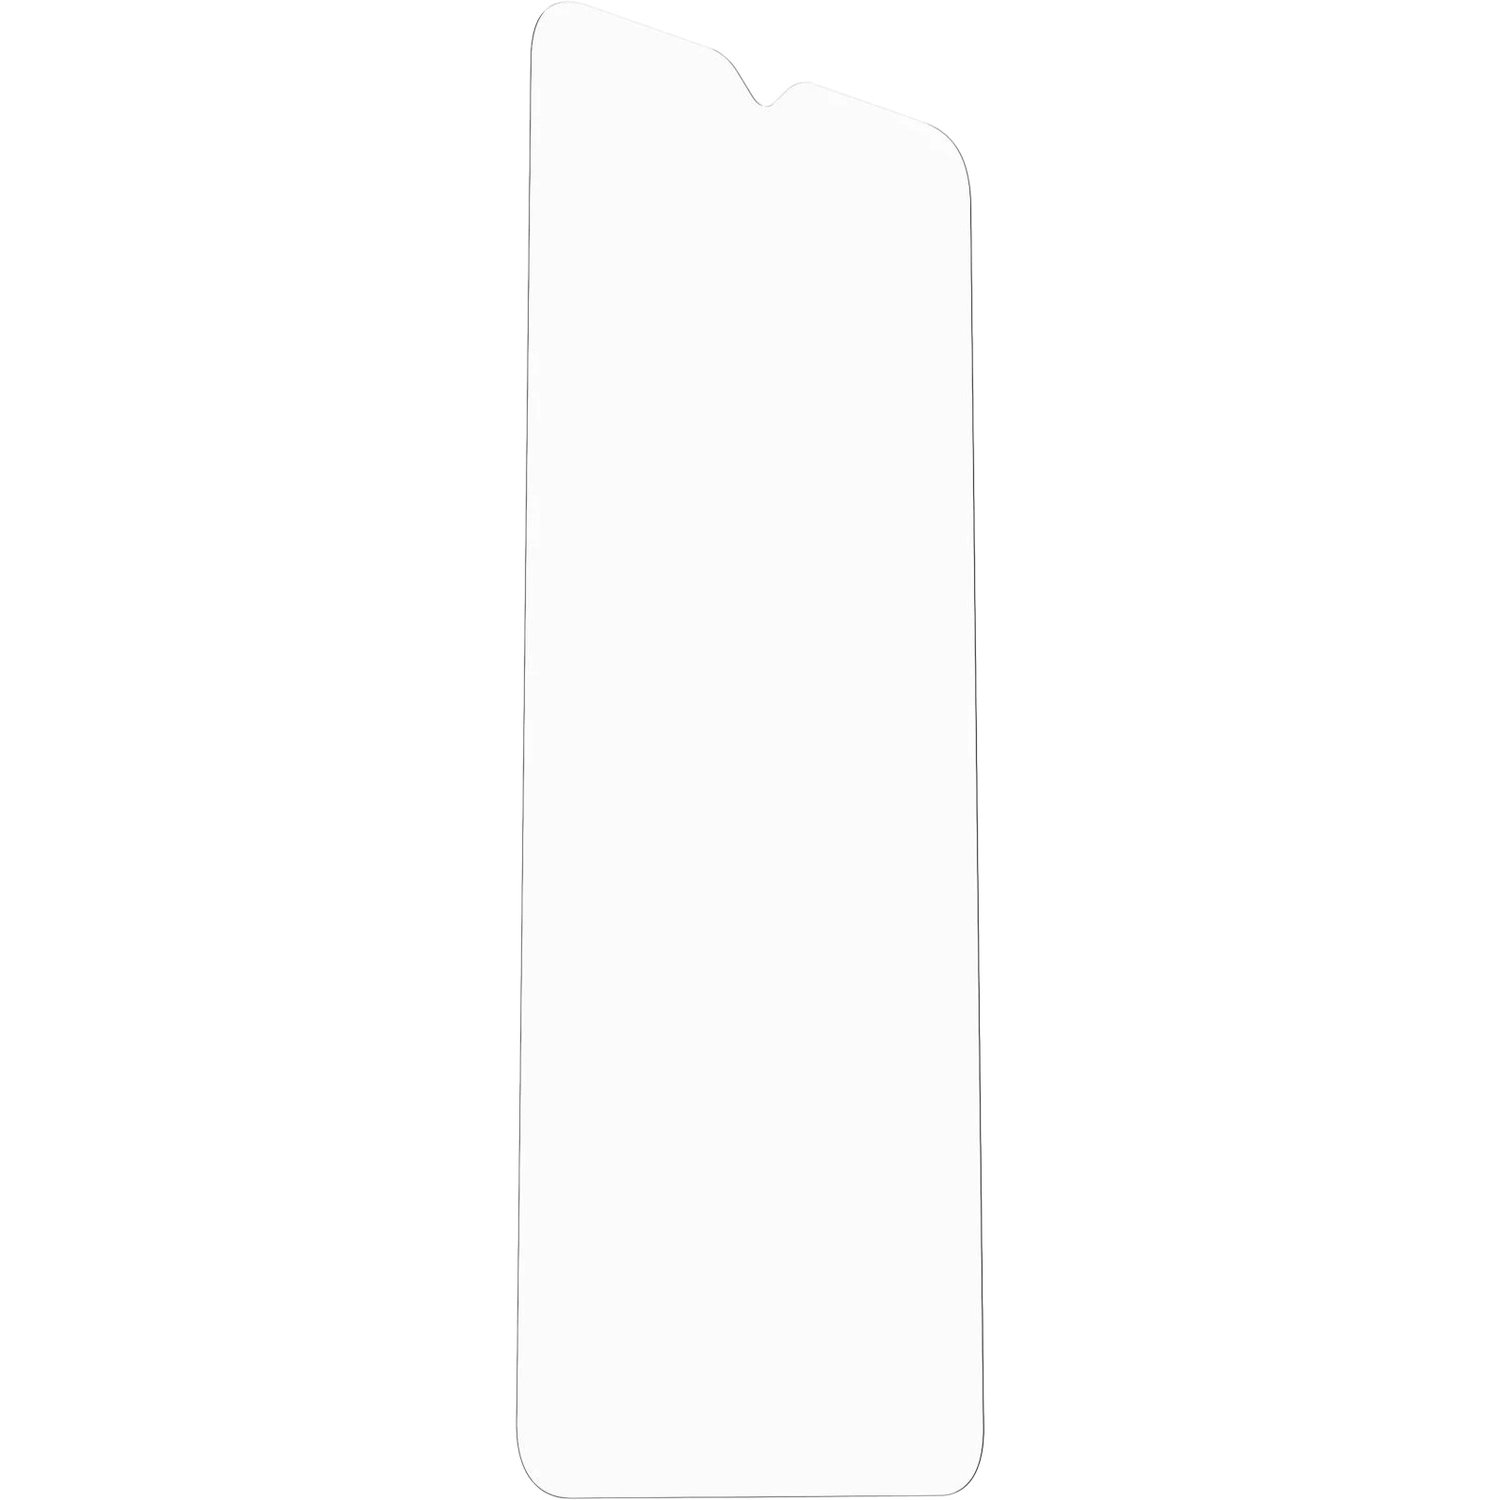 OtterBox Trusted Glass 9H Aluminosilicate Glass Screen Protector - Clear